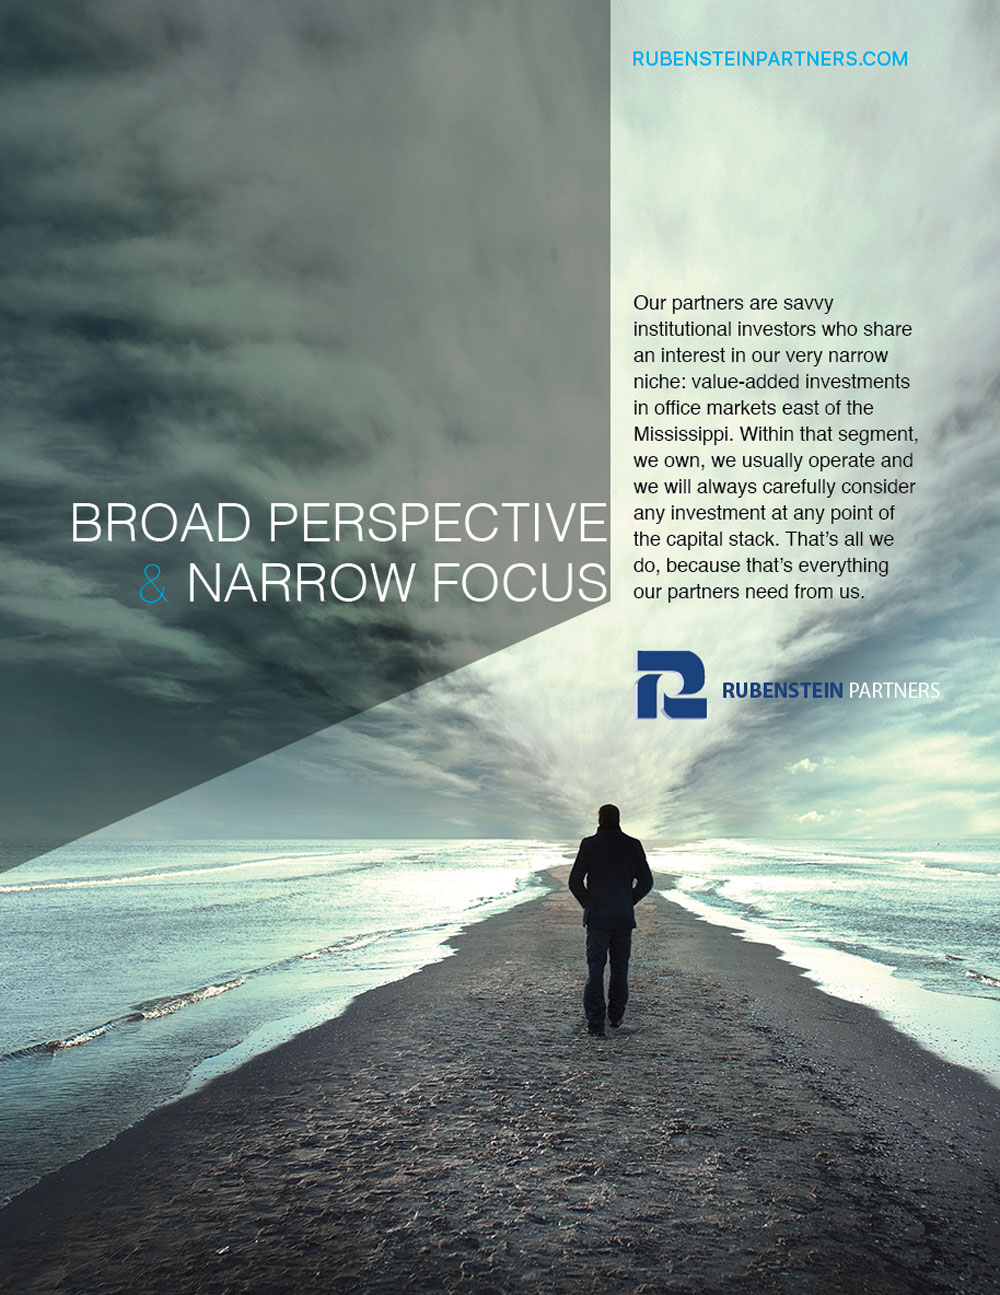 smart advertising graphic treatment with board perspective scenic view for investment firm